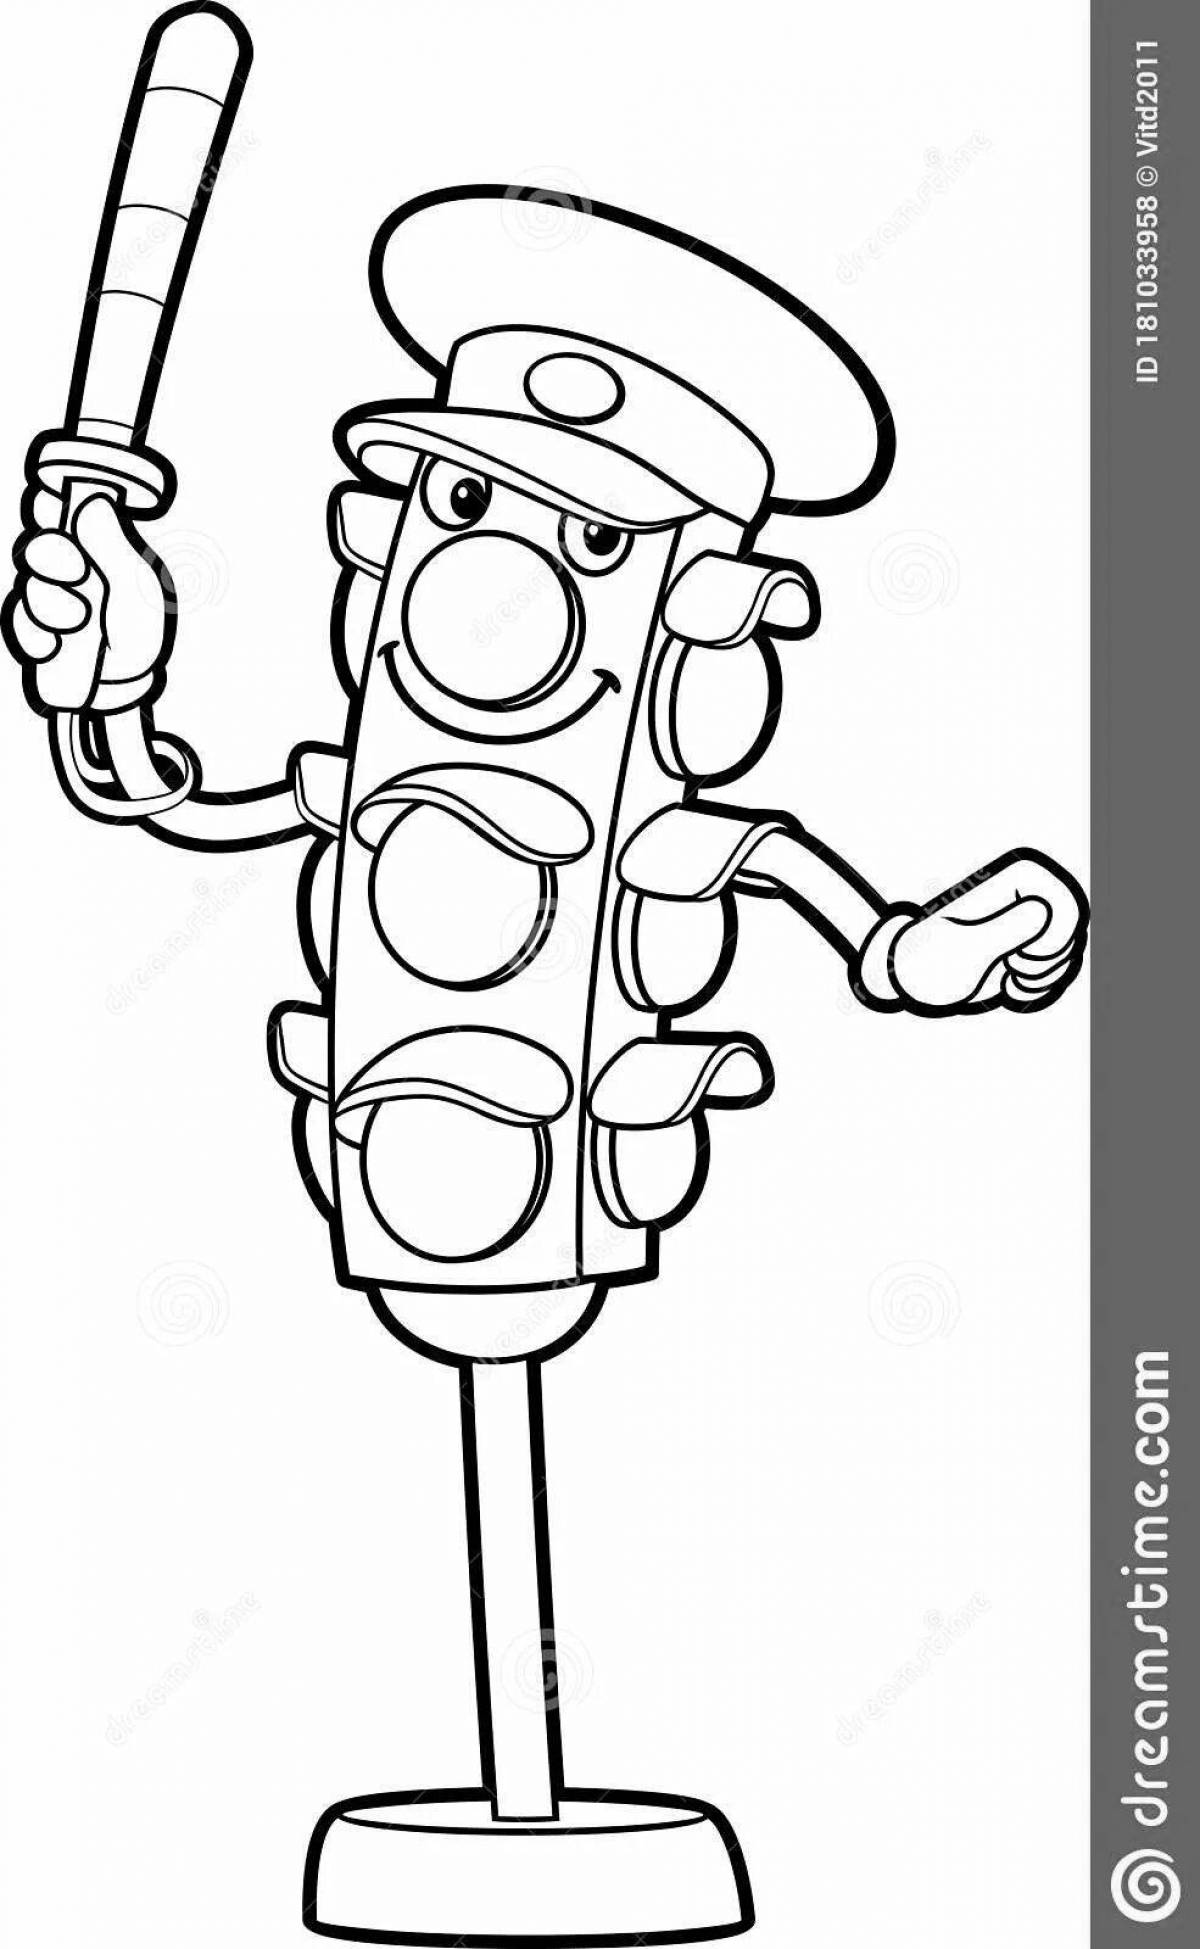 Attractive traffic controller coloring for children